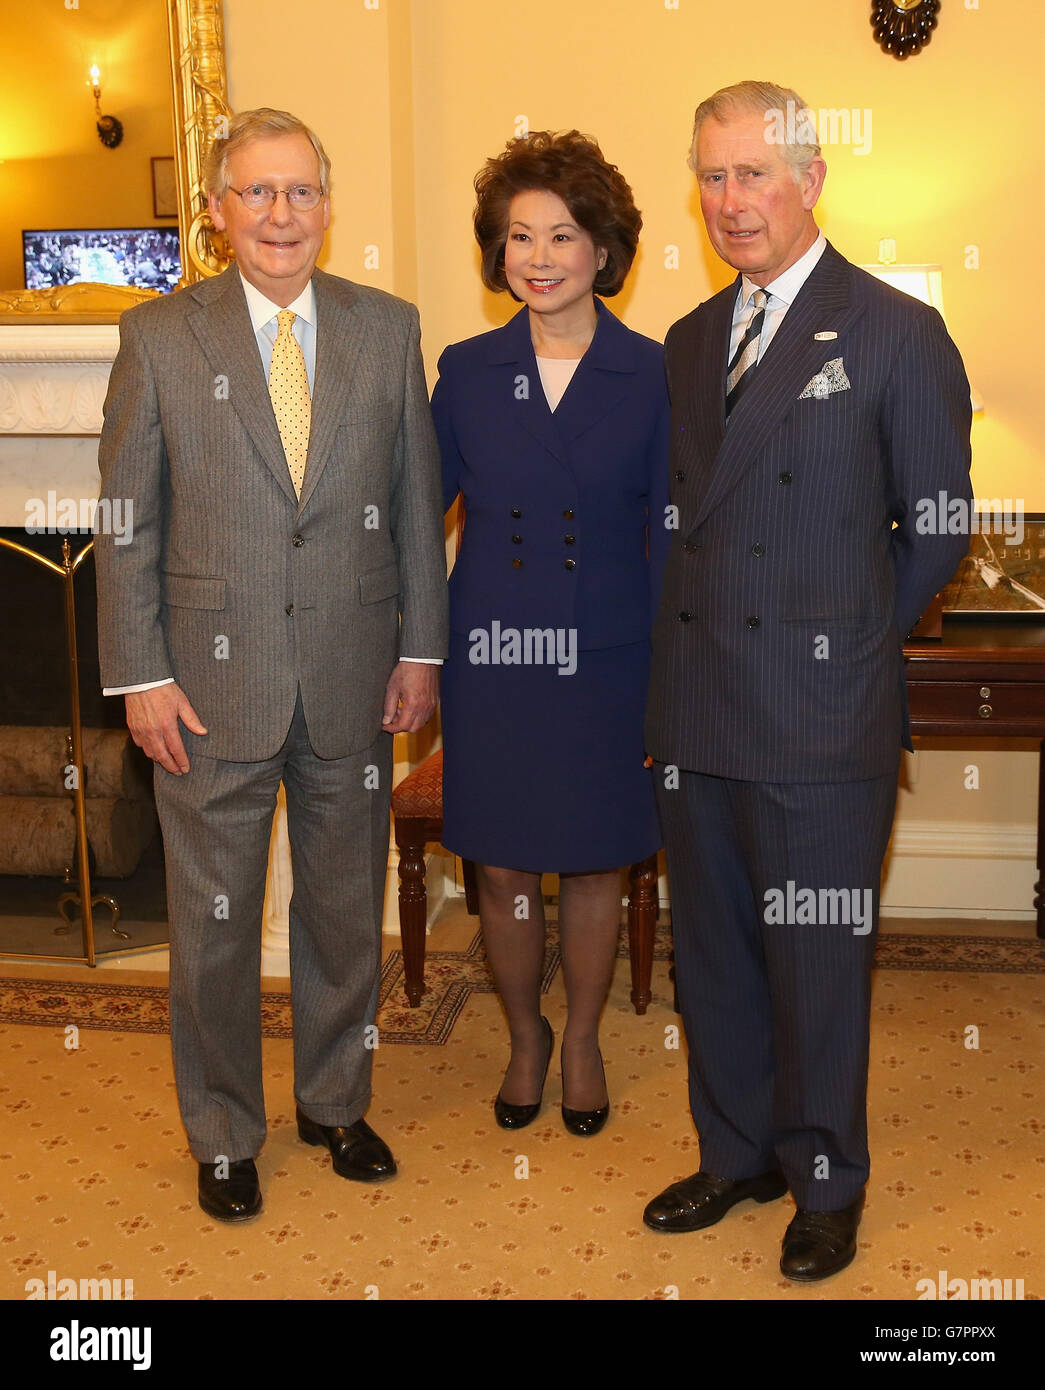 The Prince of Wales with Leader of the Senate Mitch McConnell and his wife Elaine Chao in the Capitol Building as part of his trip to Washington DC, USA. Stock Photo